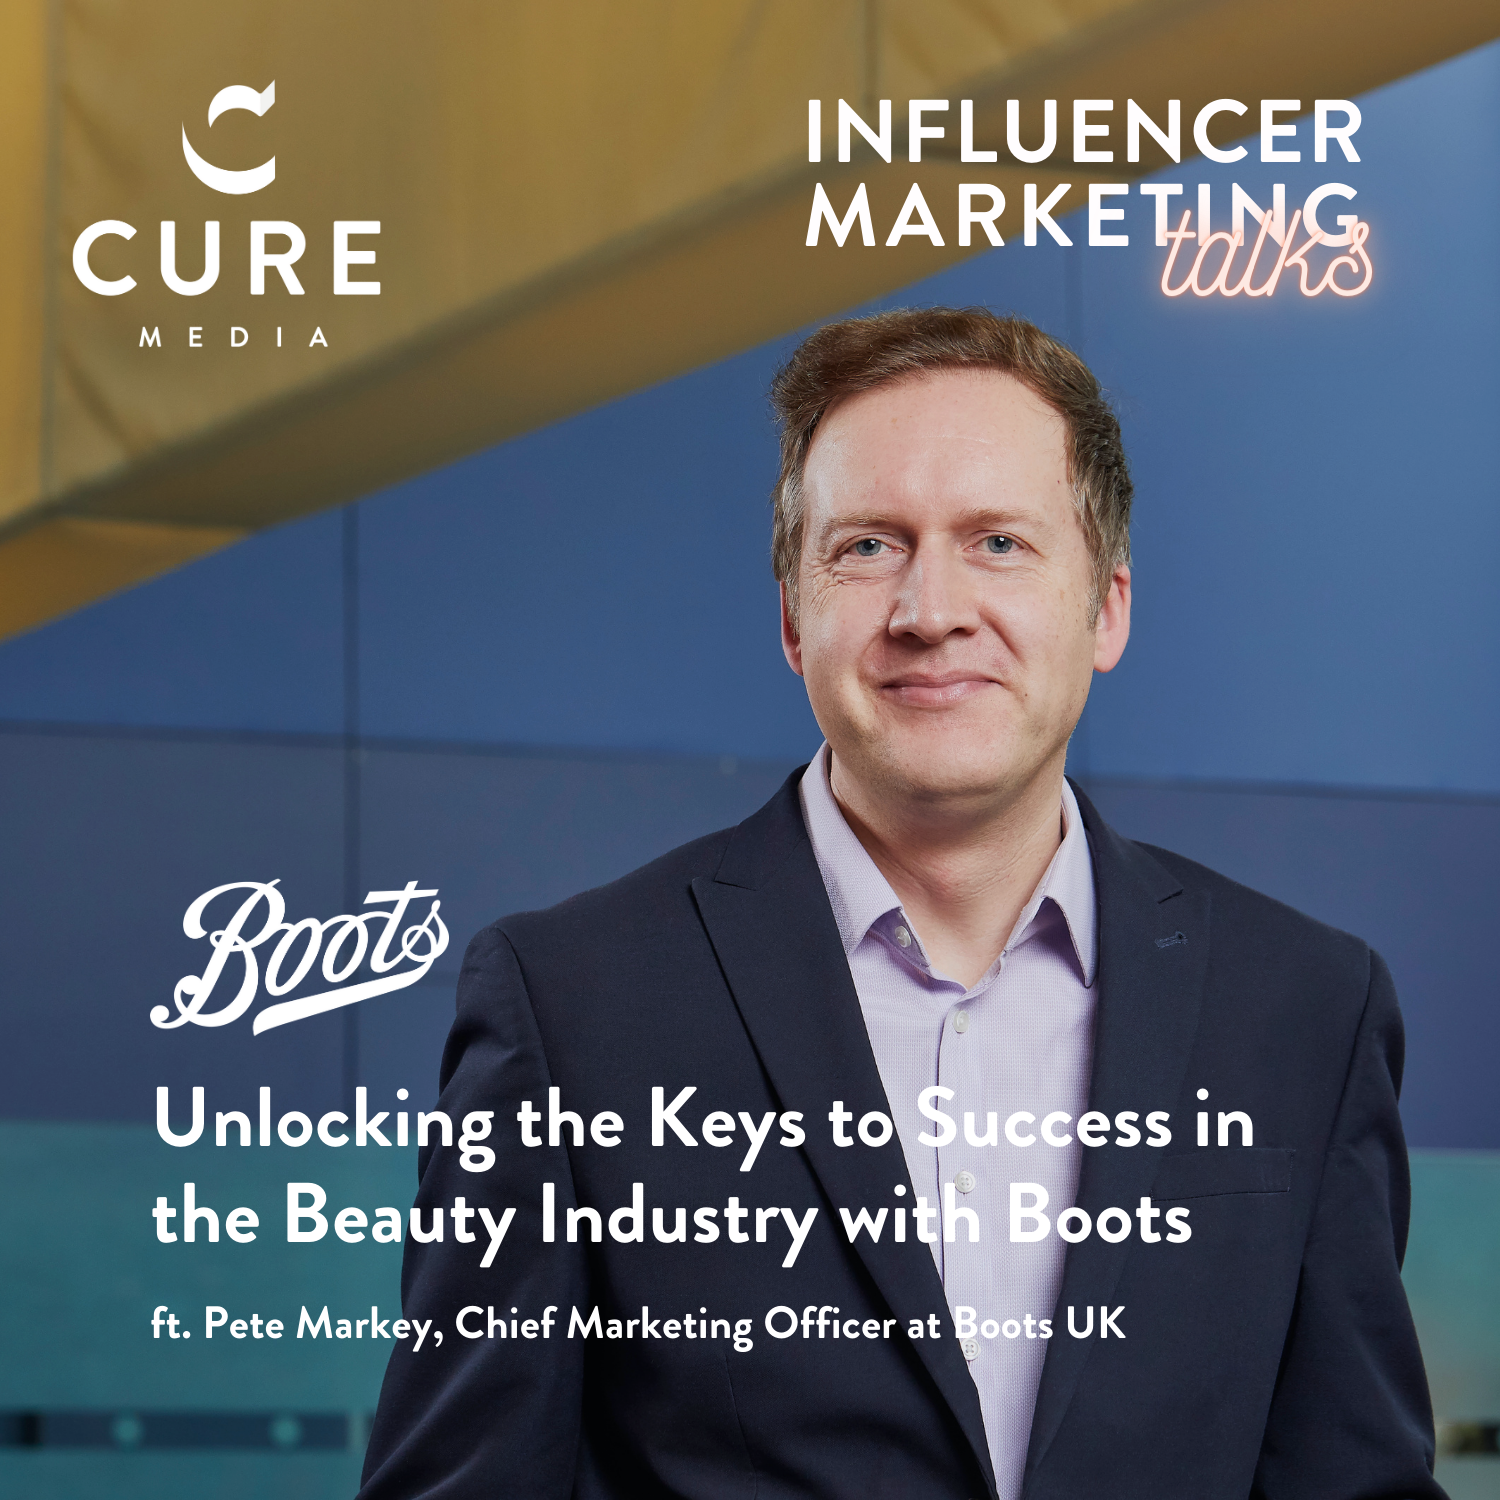 Influencer Marketing Talks E91 with Pete Markey at Boots